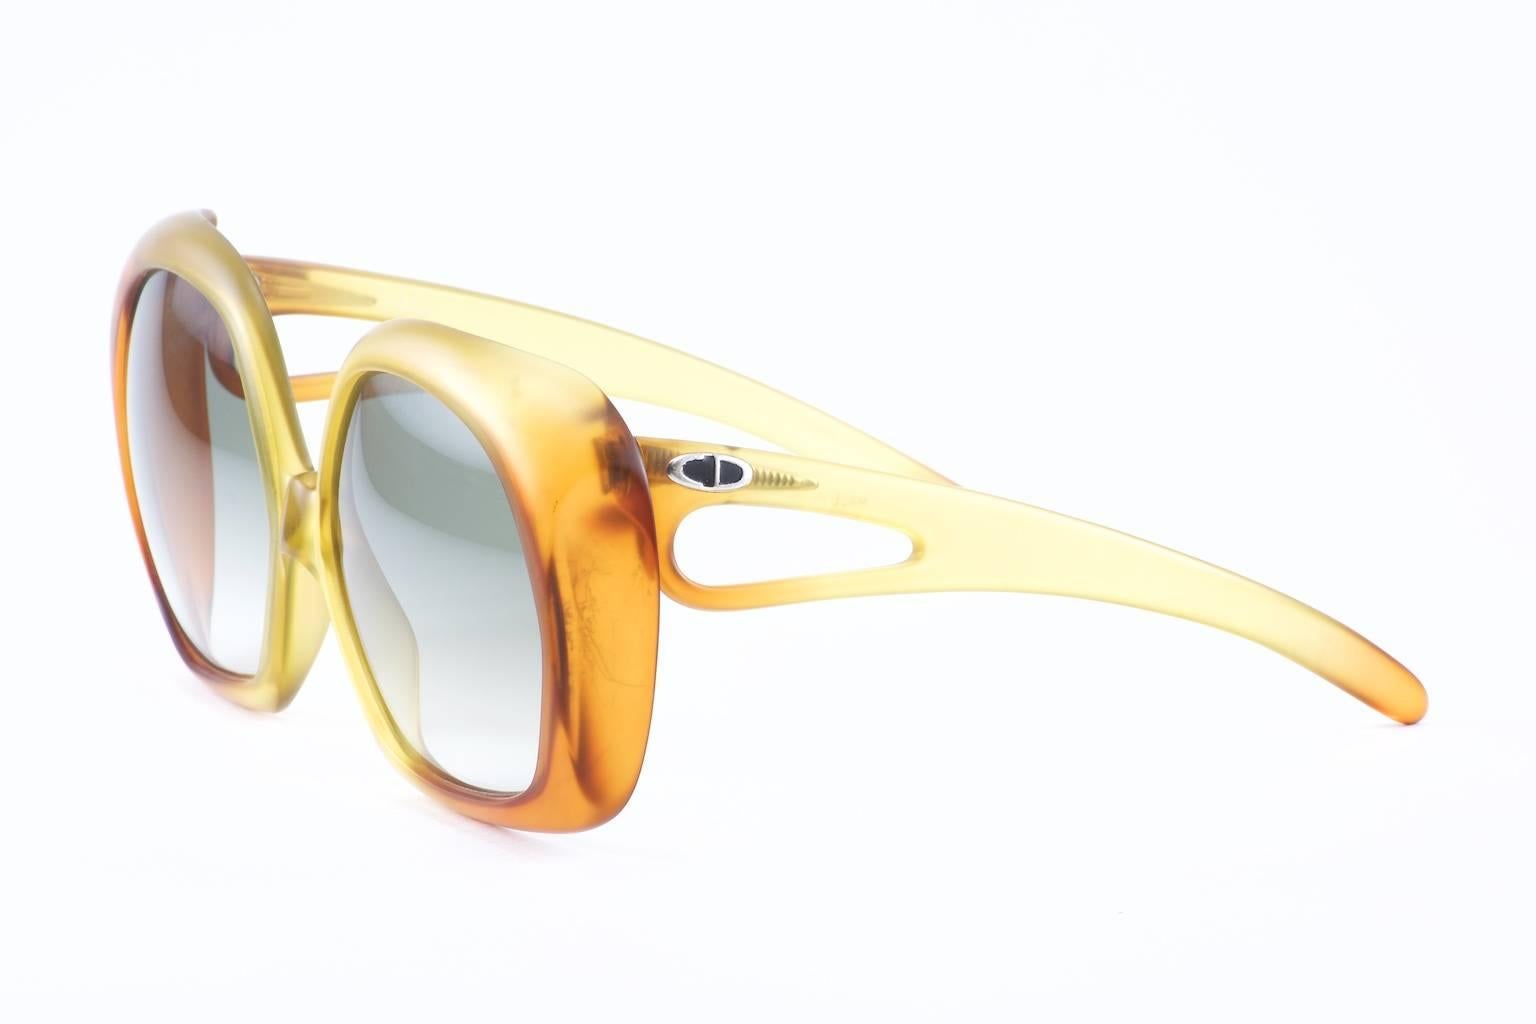 1970's Personified in this Fabulous oversized Amber Sunglass by Christian Dior. Warm glow of Matte Amber fading from the outside edge into a soft golden yellow at the bridge. 

The temple has an interesting curve with a cutout near the frame